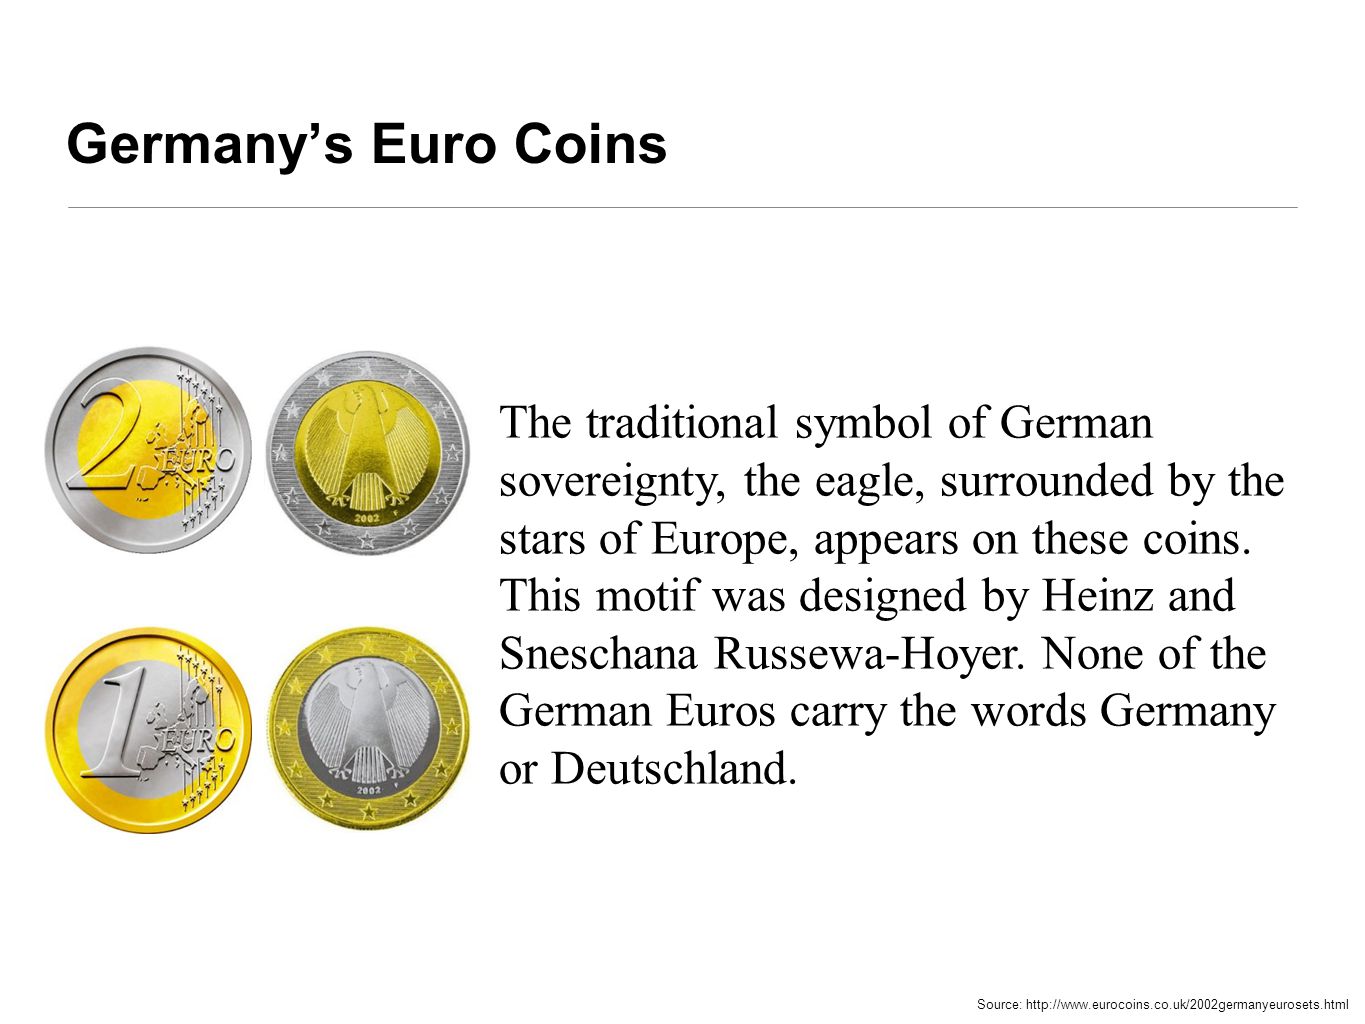 Germany’s Euro Coins The traditional symbol of German sovereignty, the eagle, surrounded by the stars of Europe, appears on these coins.